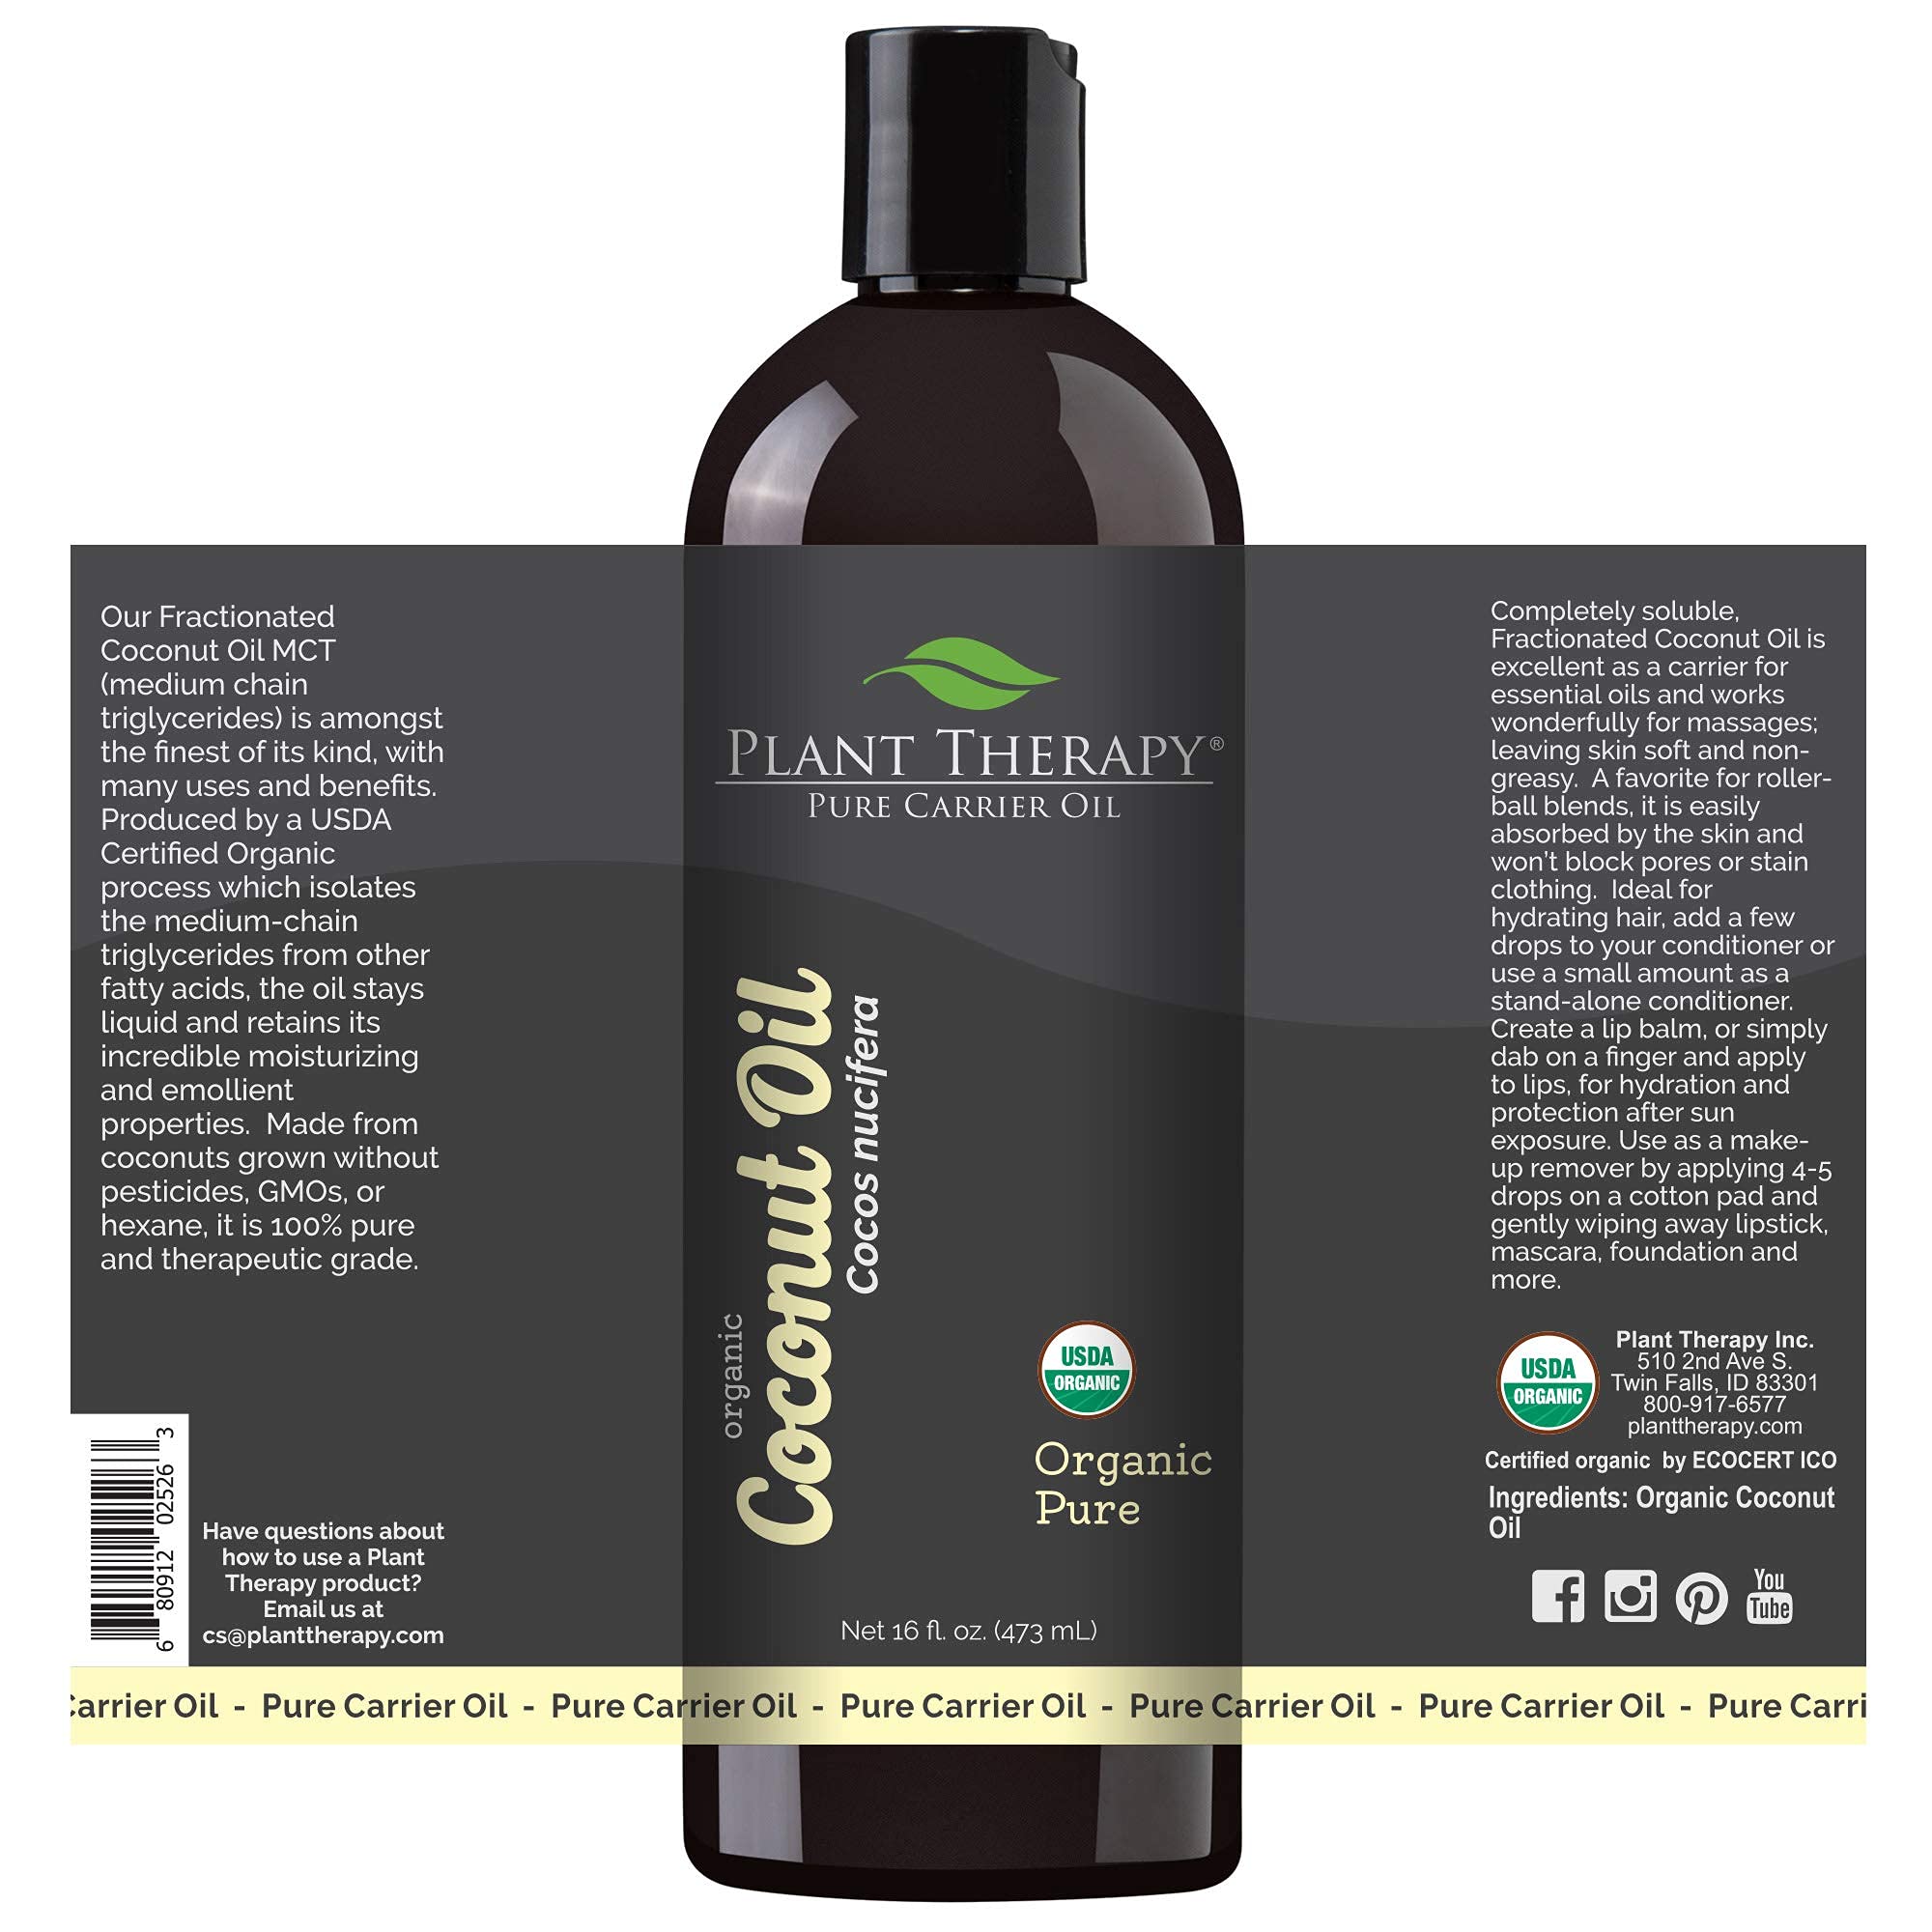 Plant Therapy Organic Fractionated Coconut Oil for Skin, Hair, Body 100% Pure, USDA Certified Organic, Natural Moisturizer, Massage & Aromatherapy Liquid Carrier Oil 16 oz